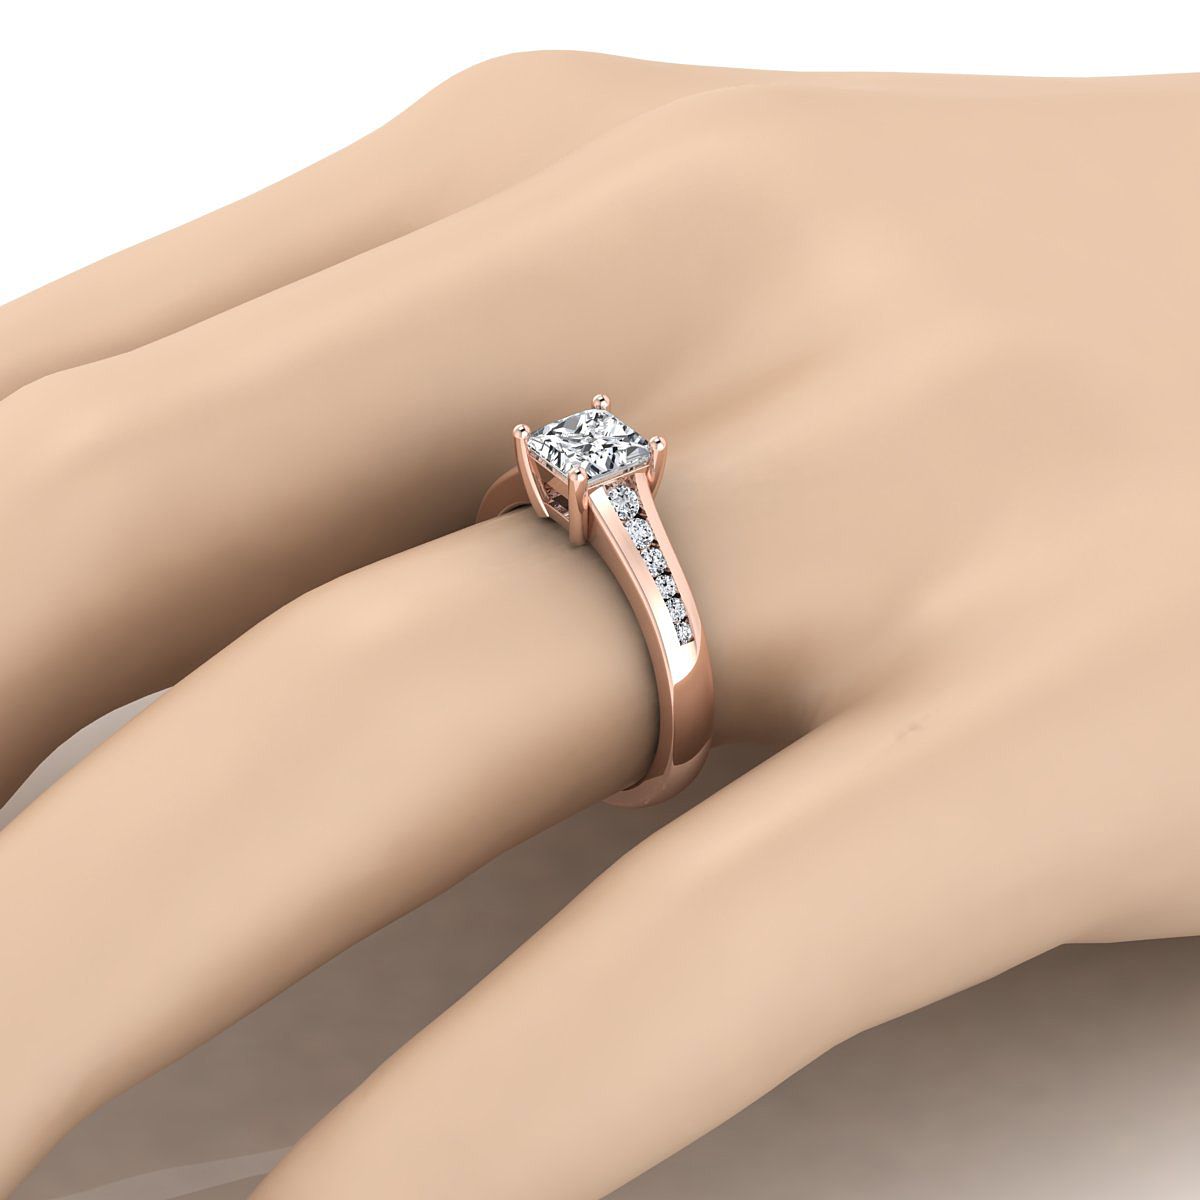 14K Rose Gold Princess Cut Contemporary Tapered Diamond Channel Engagement Ring -1/6ctw